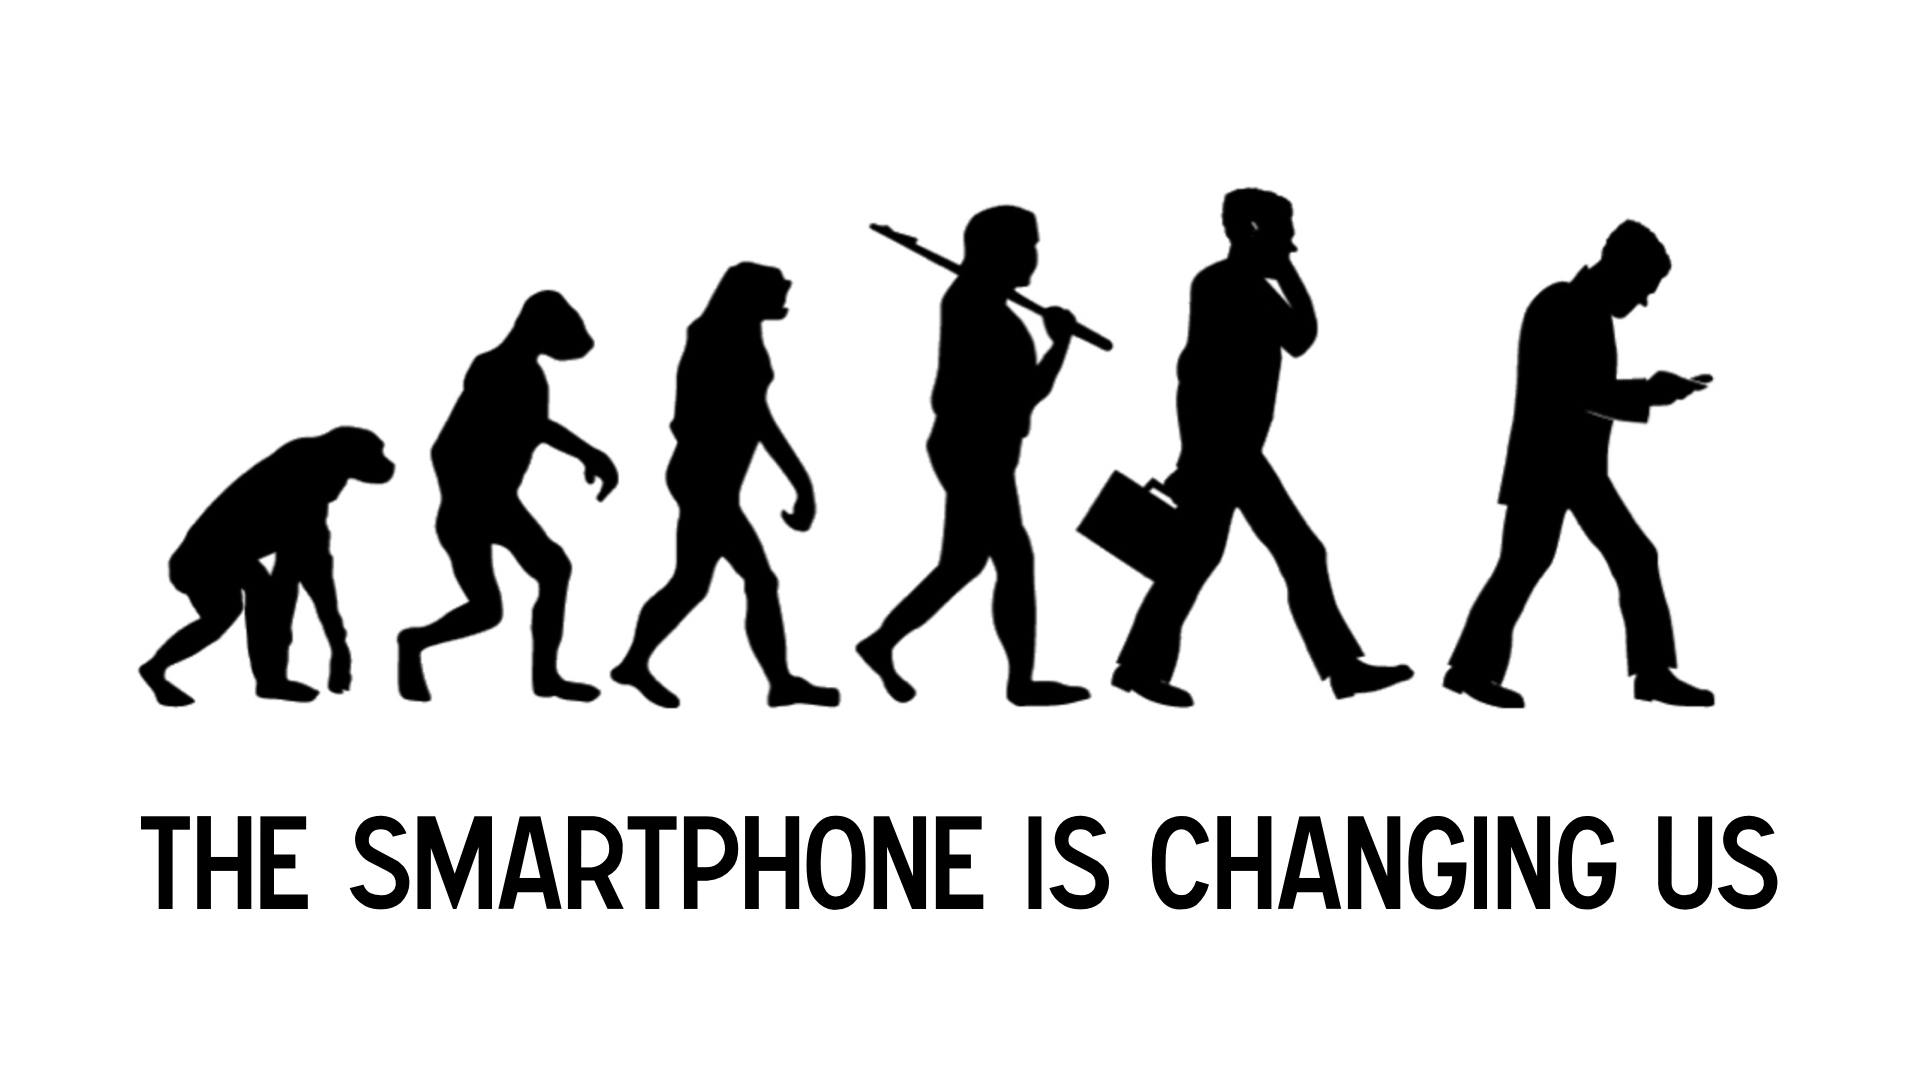 The smartphone is changing us